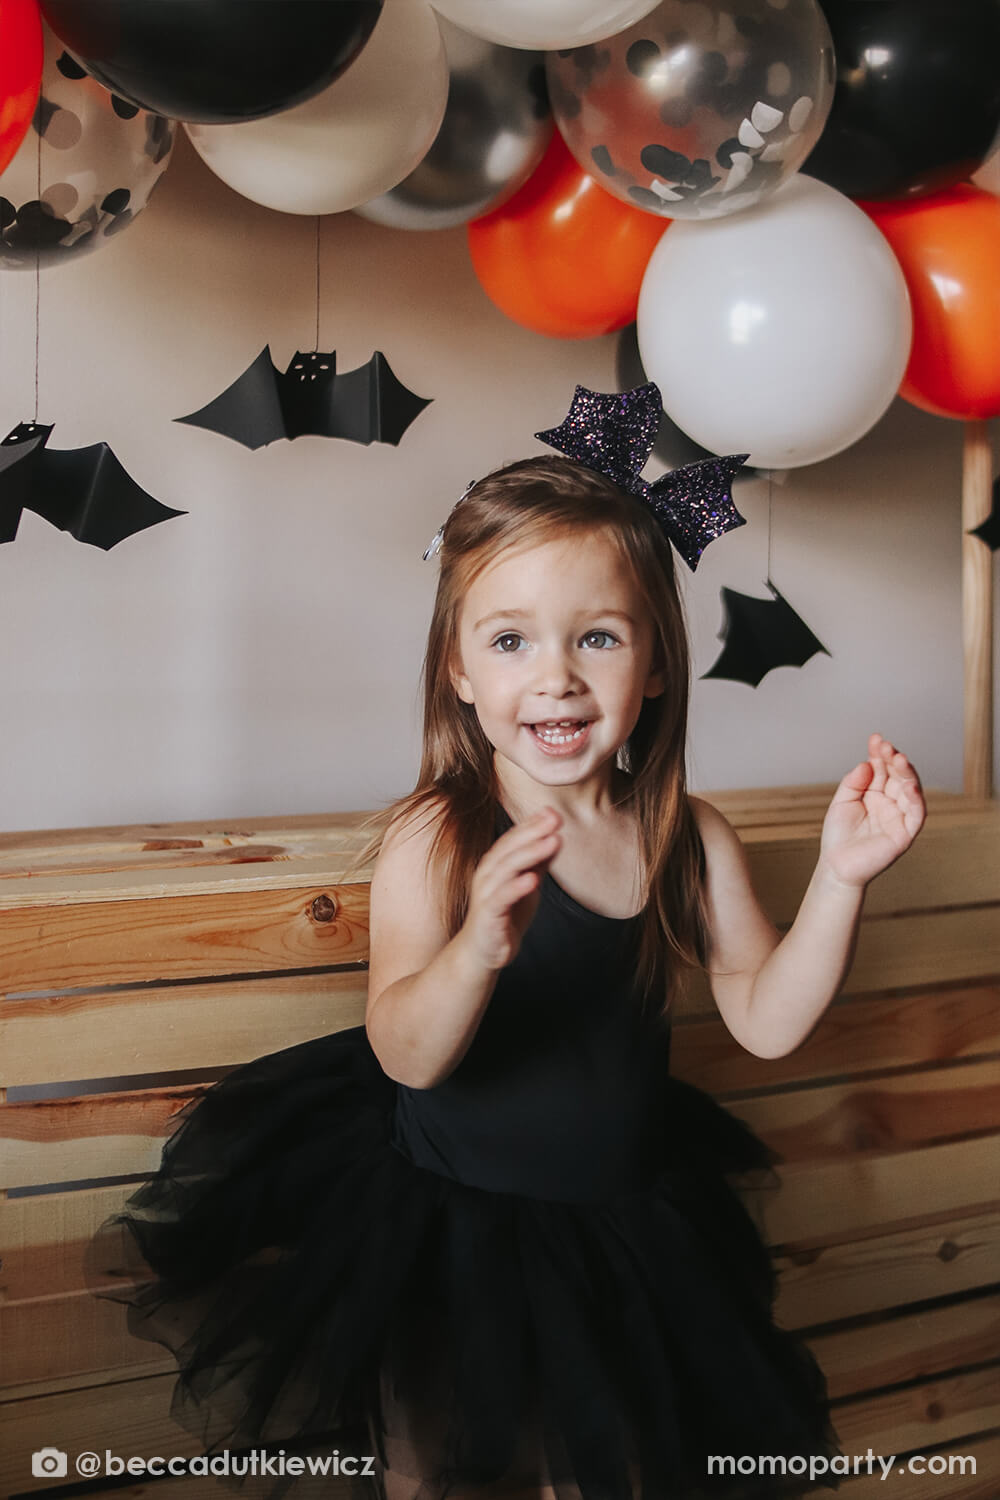 Girl wearing black tutu dress and Bat Bow Headband by Great Pretenders, dancing in front of Meri Meri Halloween Balloon Garland, mixed with black, silver, orange, white and confetti balloons and hanging bat decoration. These Beautiful and affordable halloween Accessory and party decorations, party supplies are spooktacular fun for your Halloween bash. Find theme in party boutique online store at momoparty.com